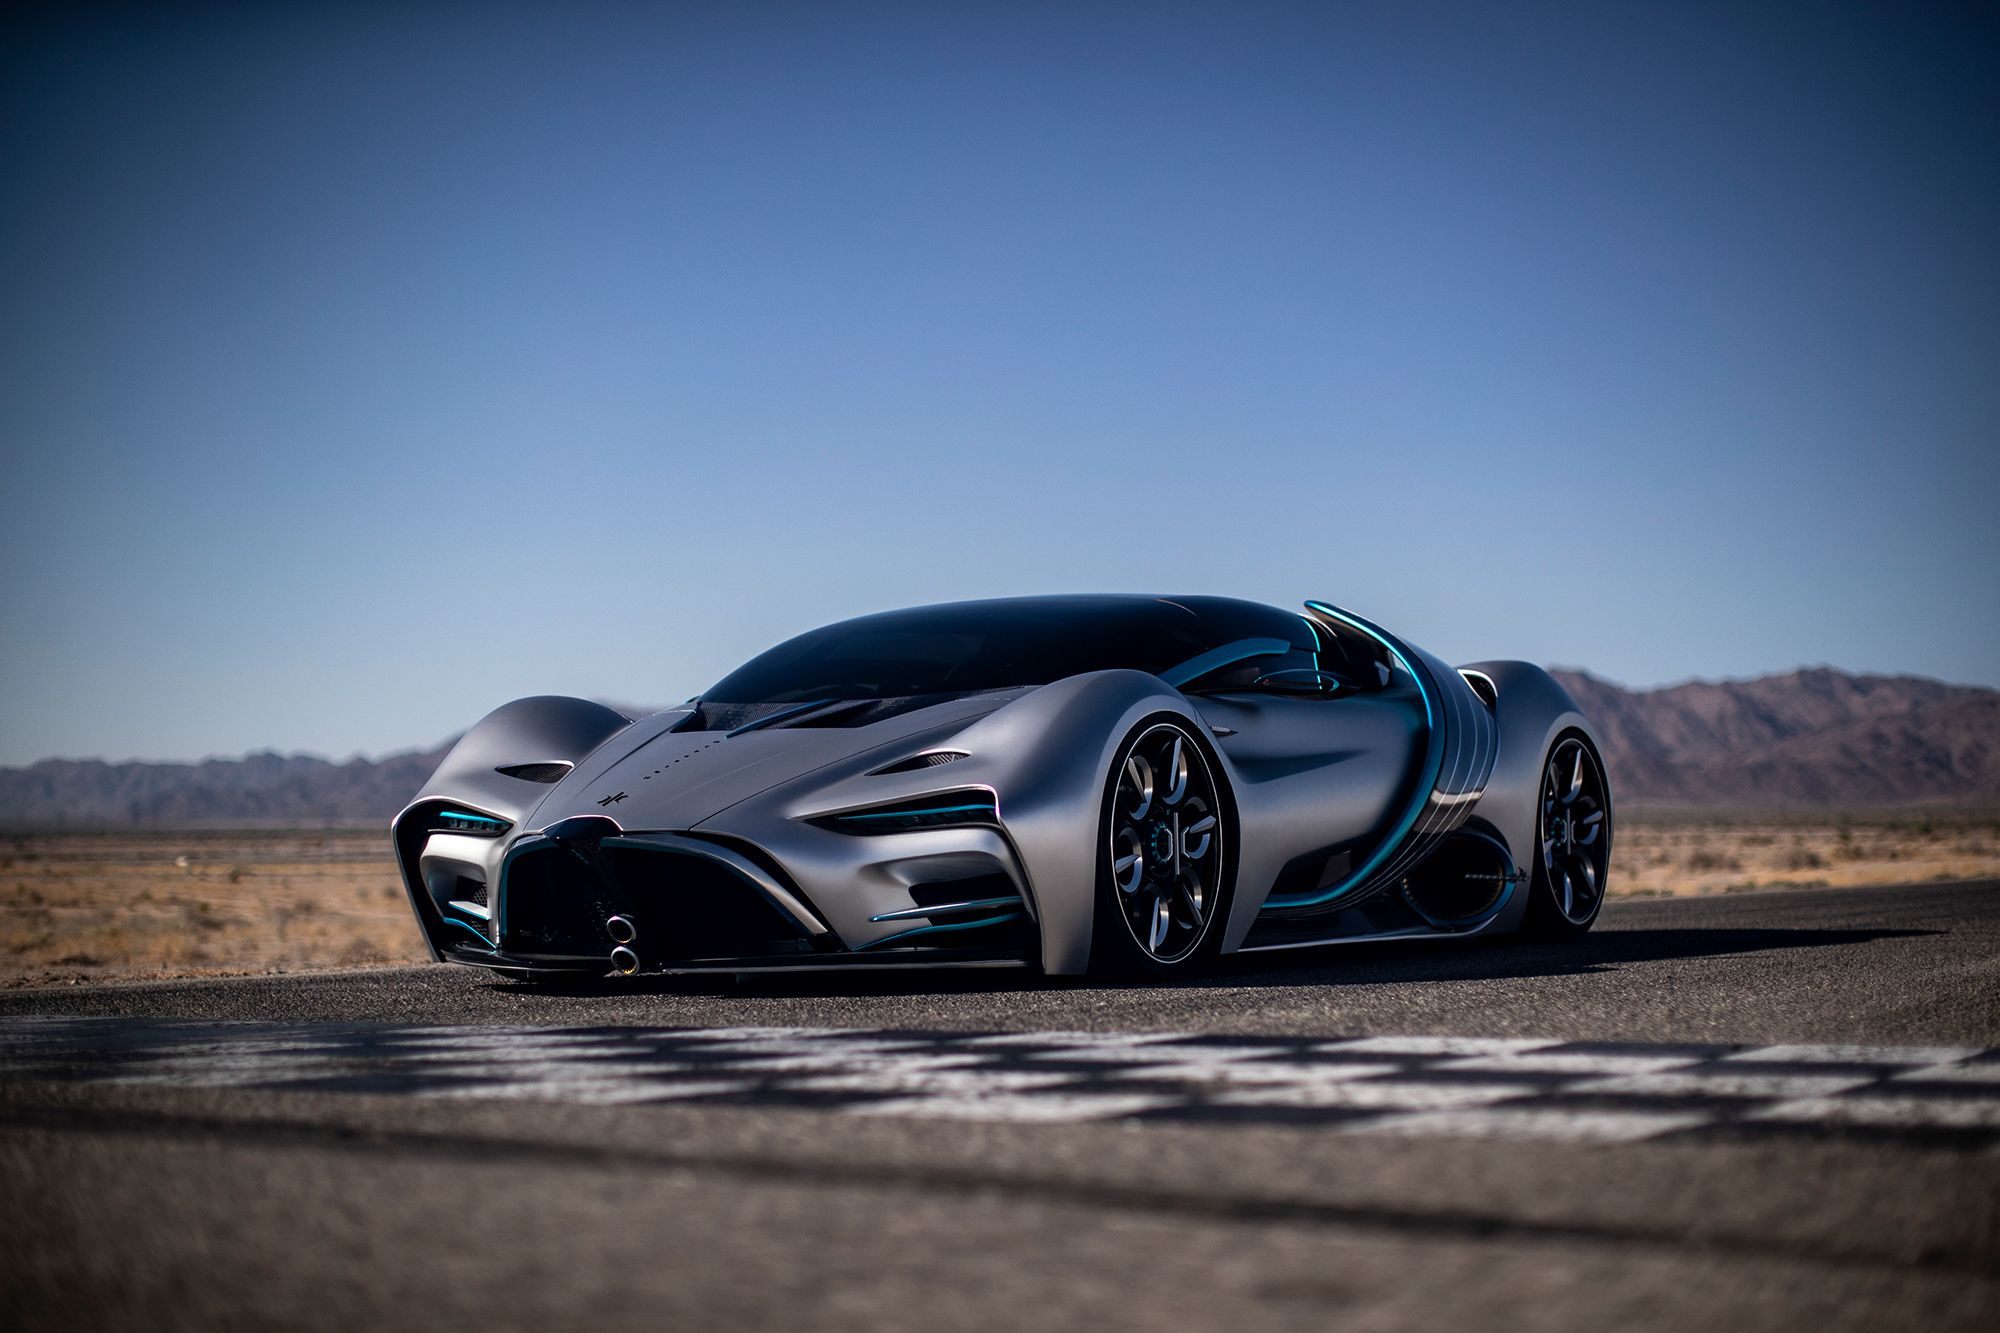 The Hyperion hydrogen-powered supercar can drive 1,000 miles on a